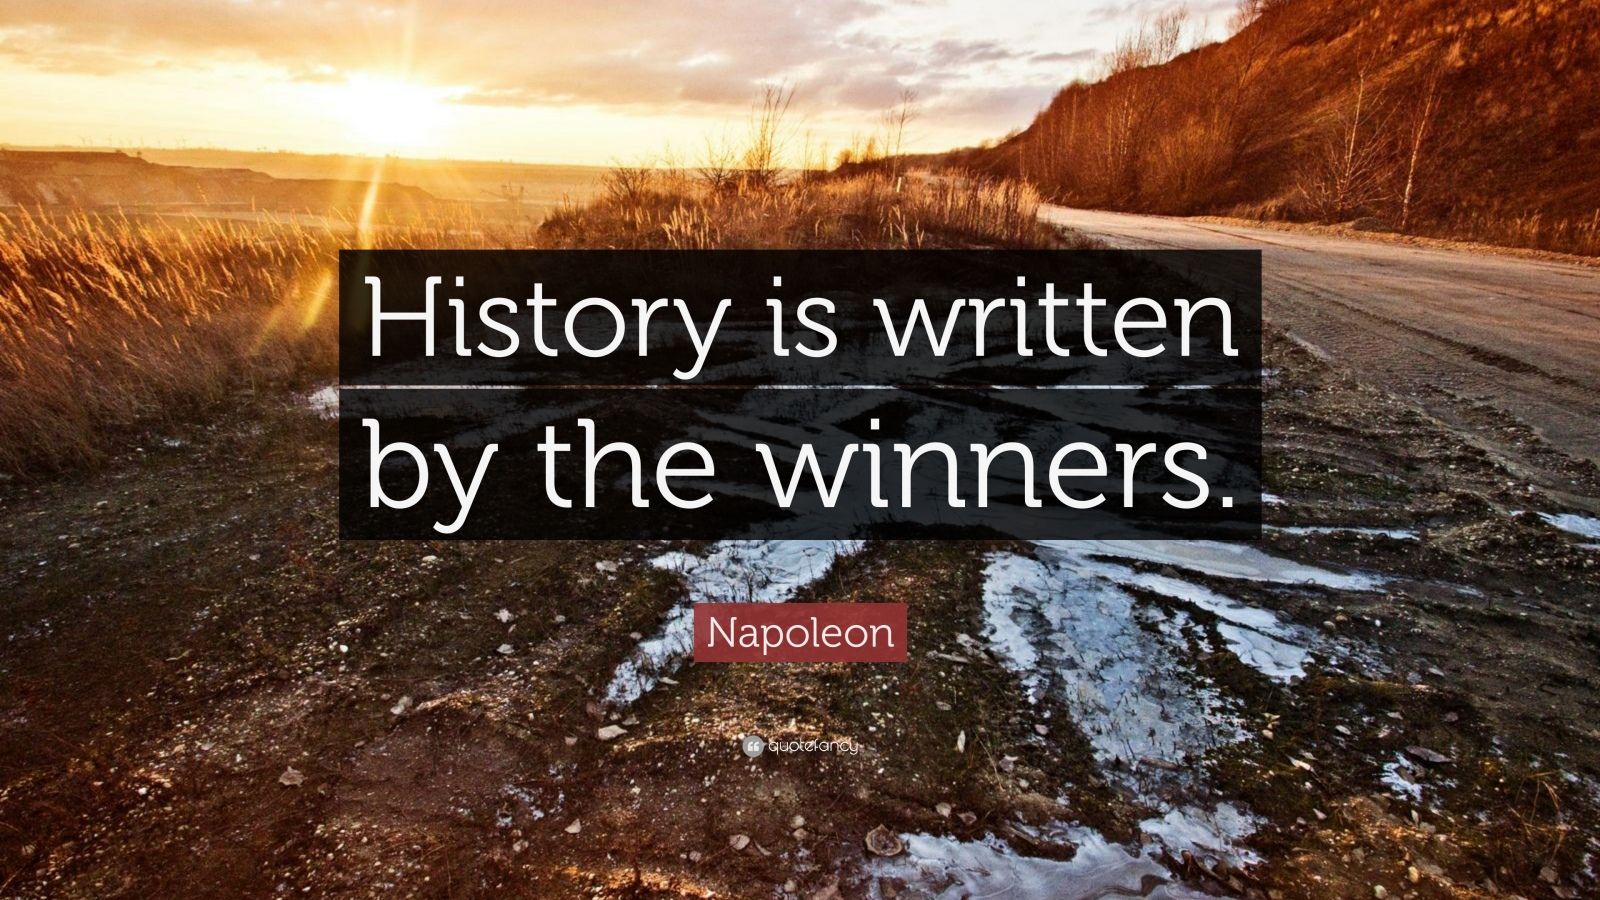 write history quotes